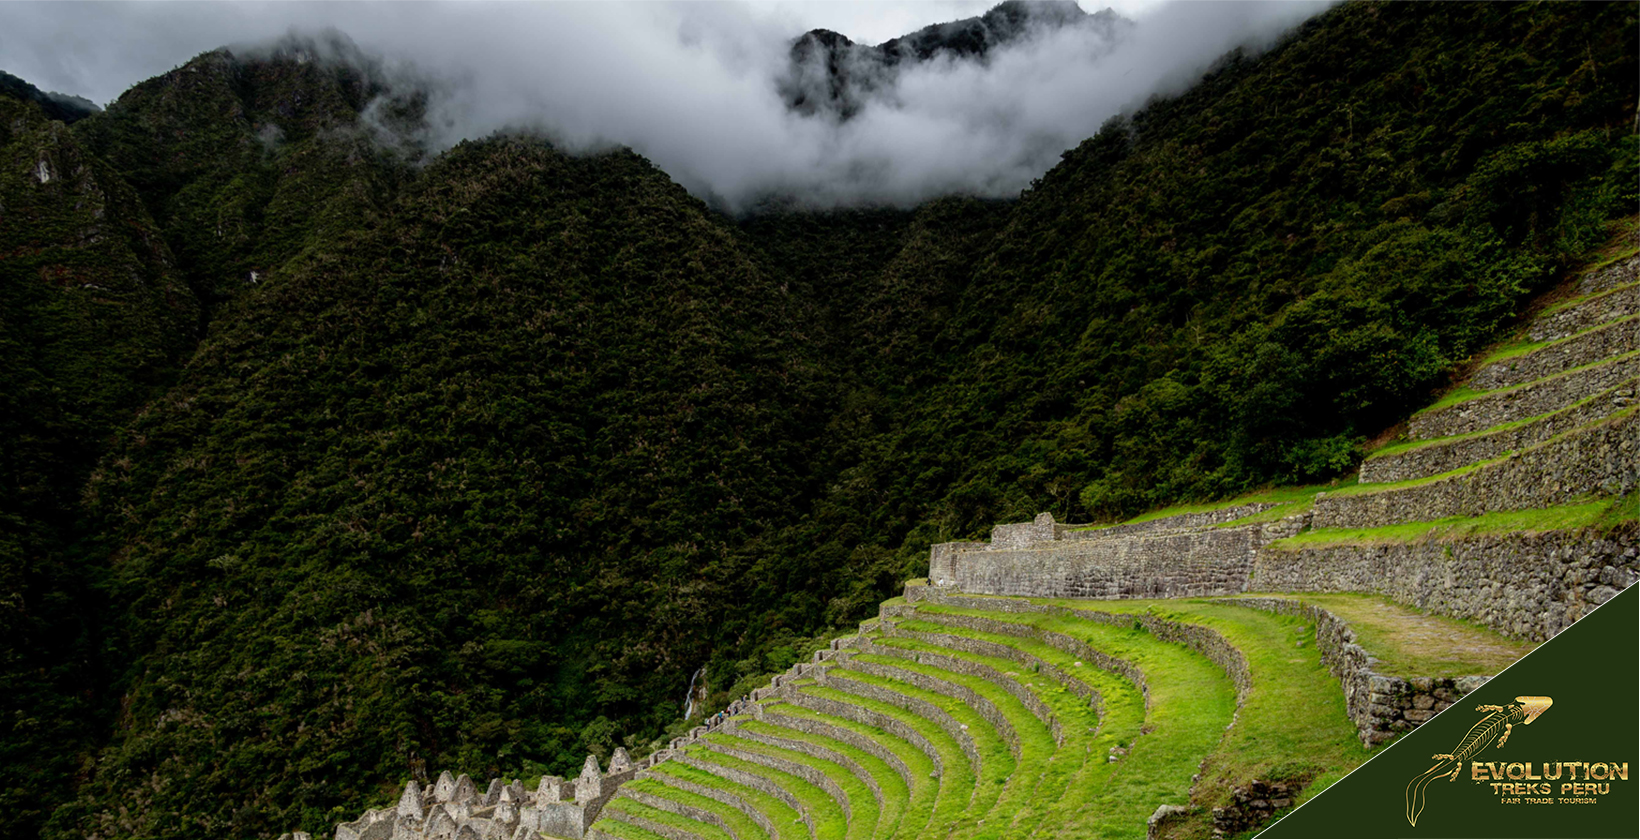 Inca Trail Peru Guide: Tours, Hiking, Maps, Buildings, Facts and History